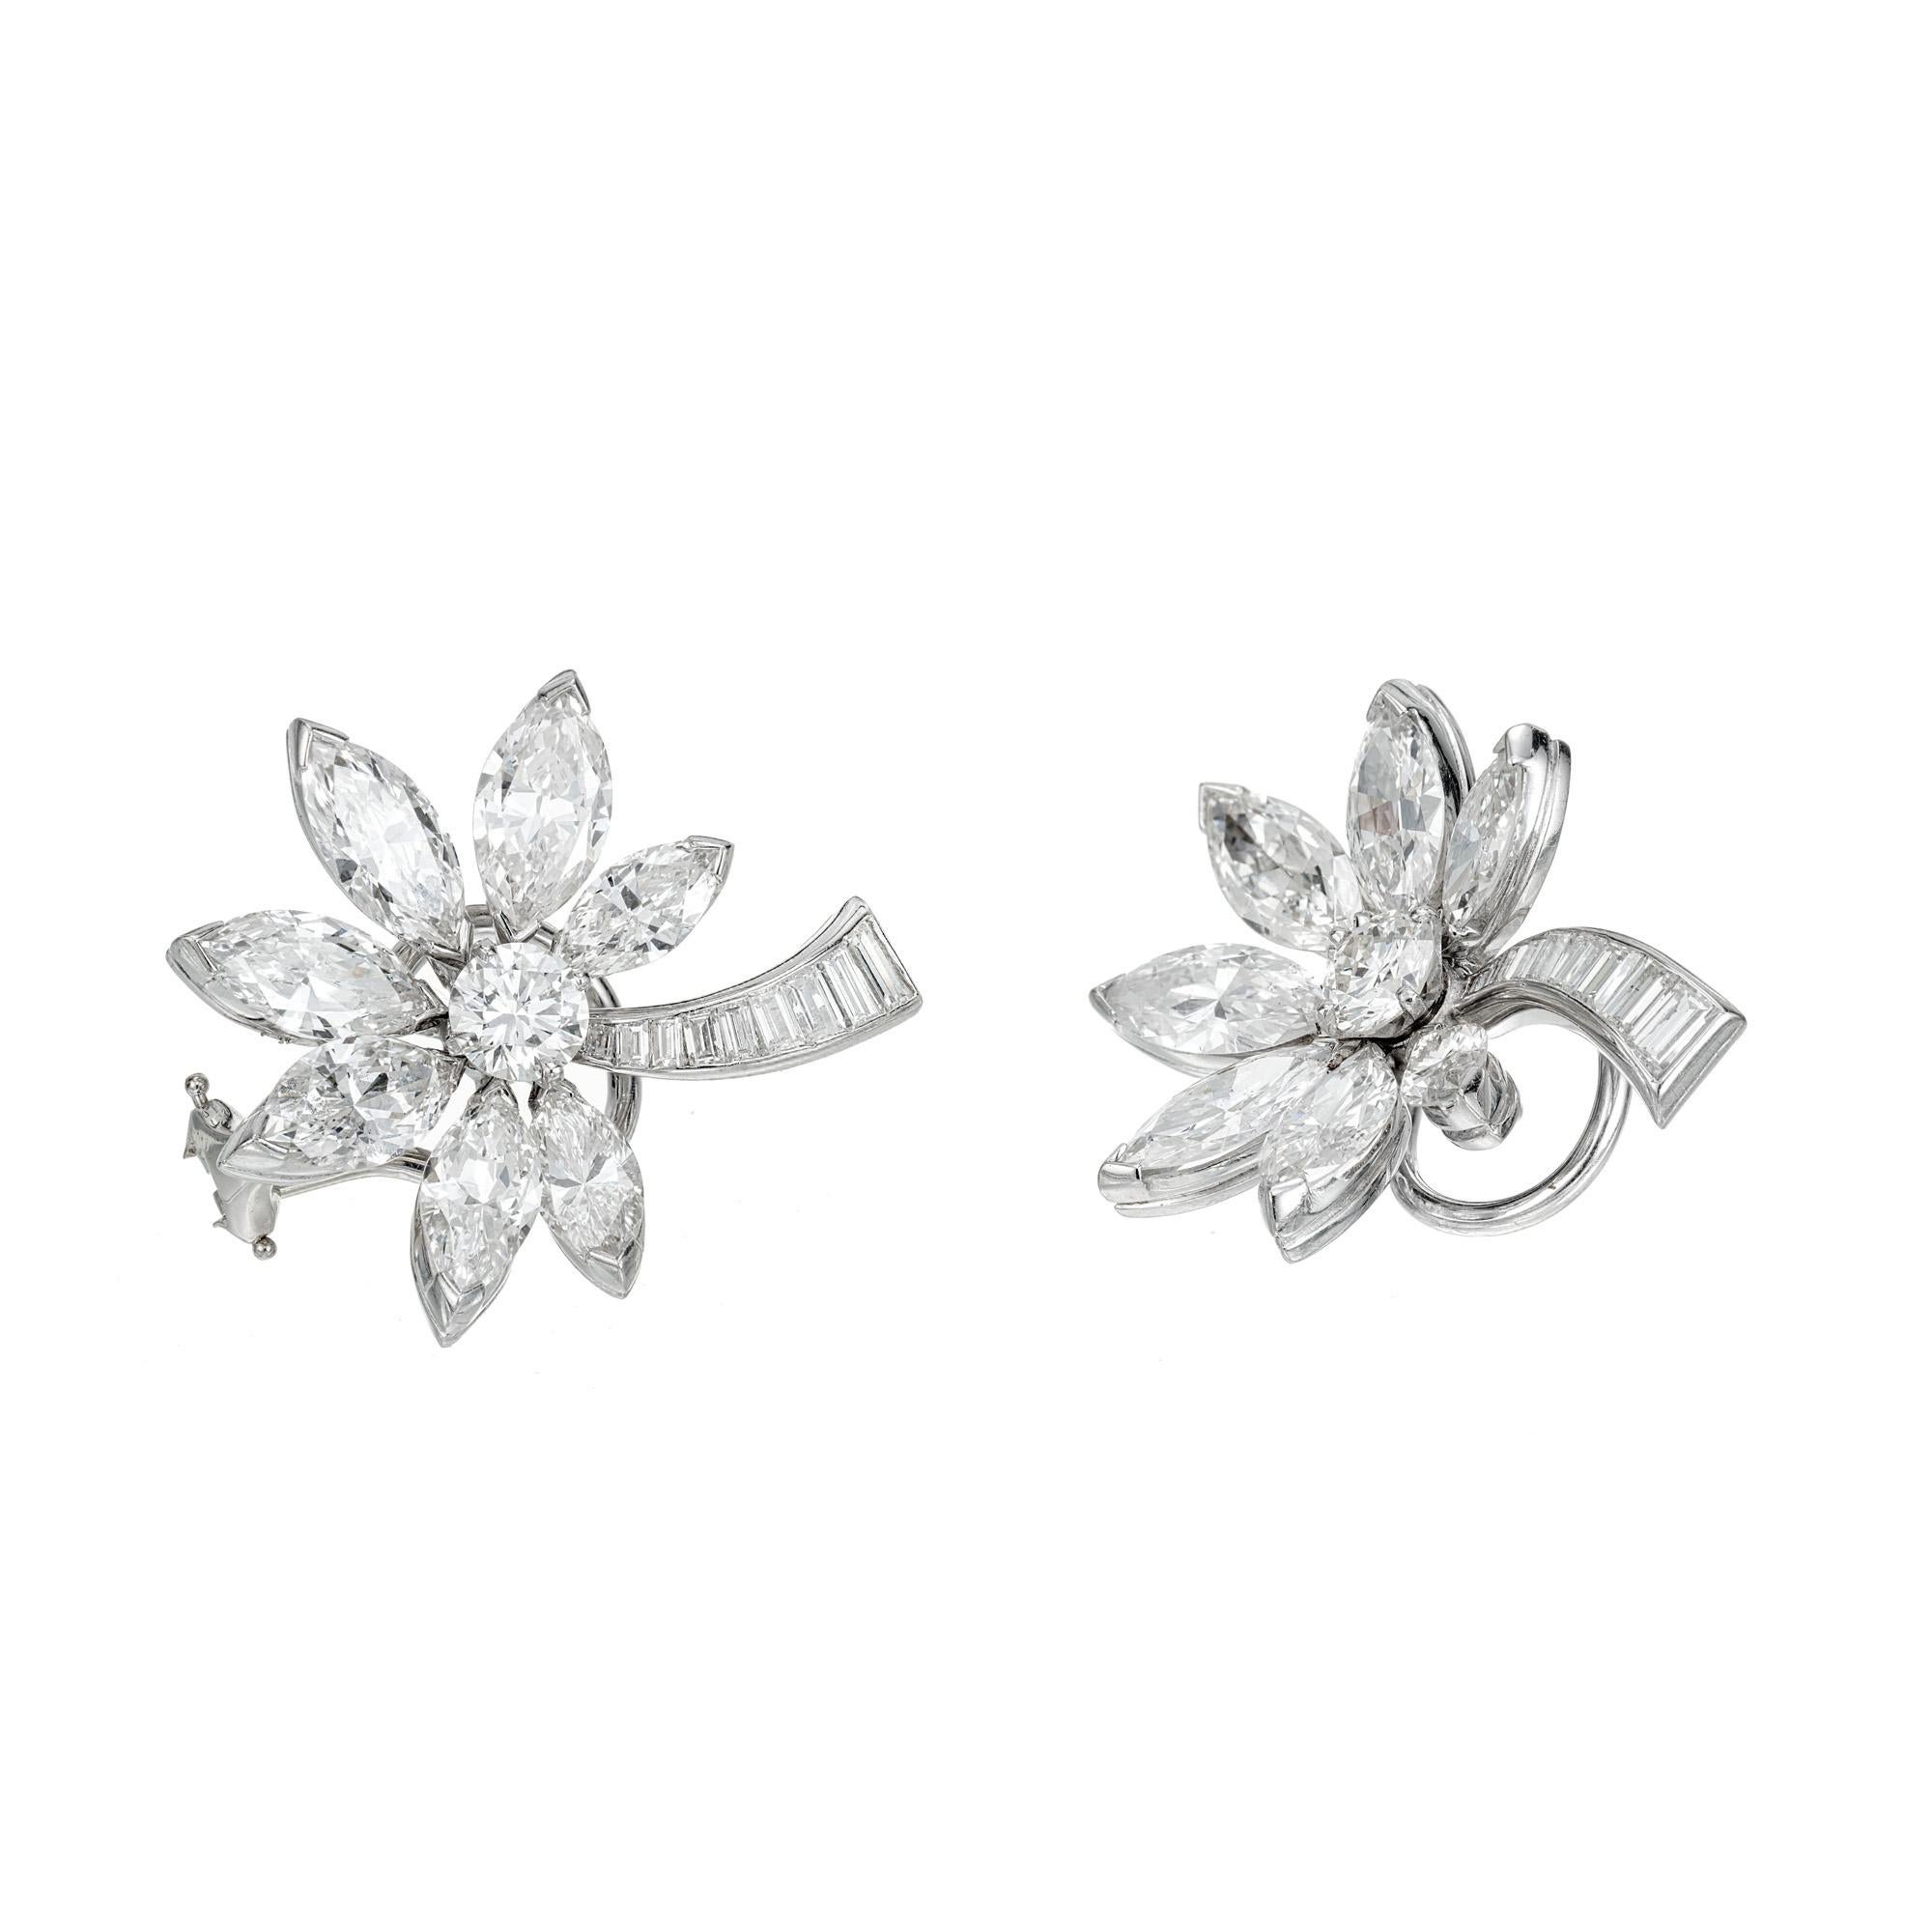 Handmade diamond Platinum and 14k white gold flower design earrings. Round, baguette and marquise diamonds in a flower shaped, clip post setting. Omega clip backs and posts. The baguette section goes up and the Marquise point down. 

2 round